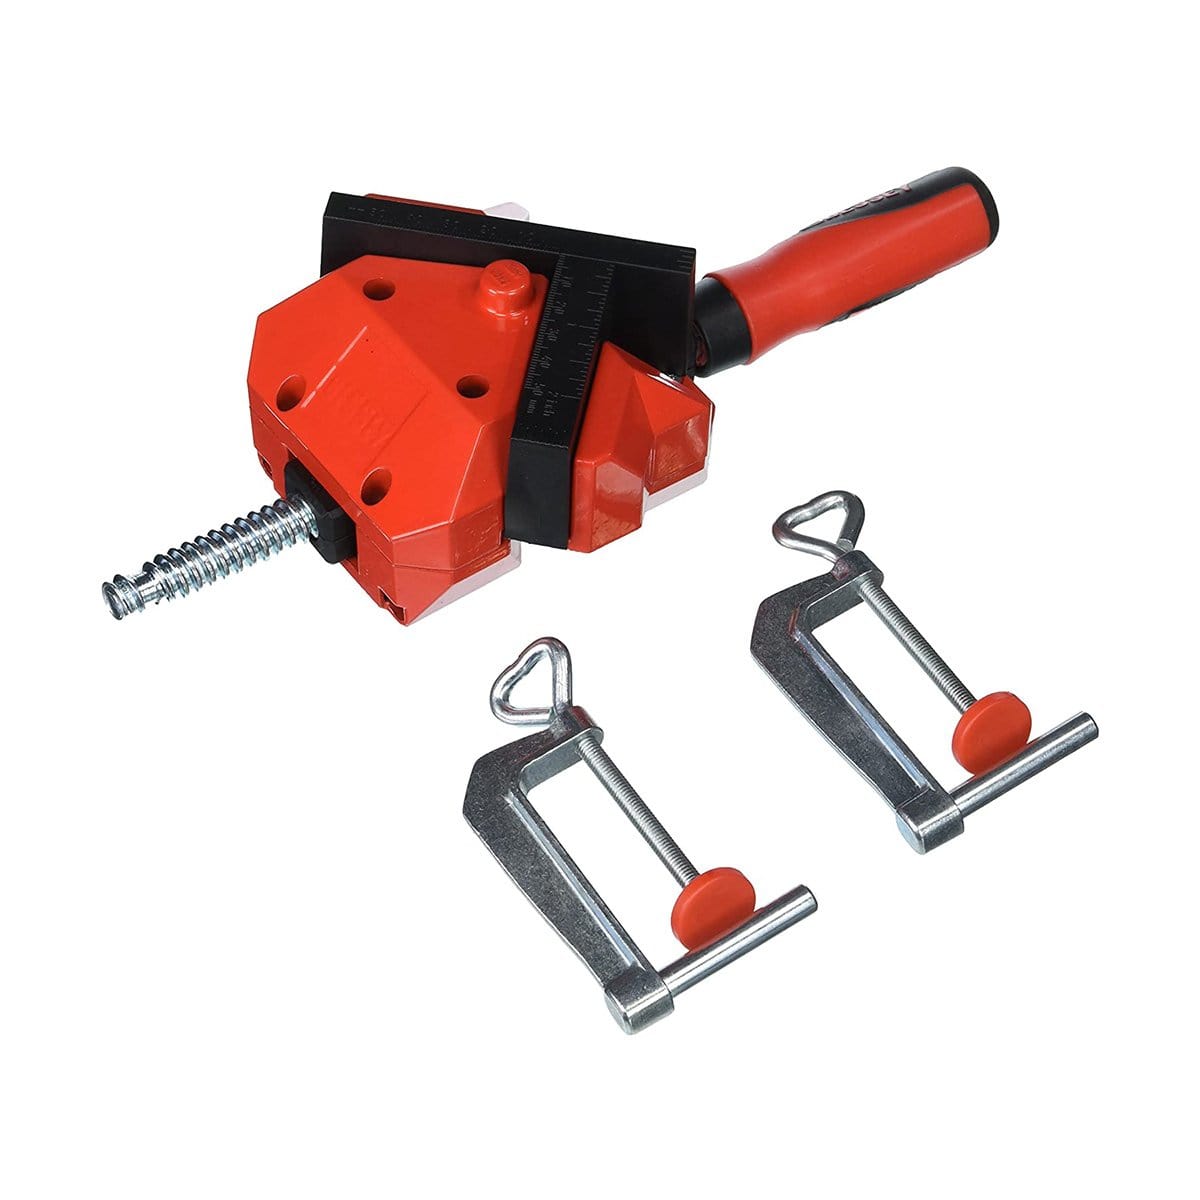 Bessey Tools WS-3+2K Clamp Angle Clamp